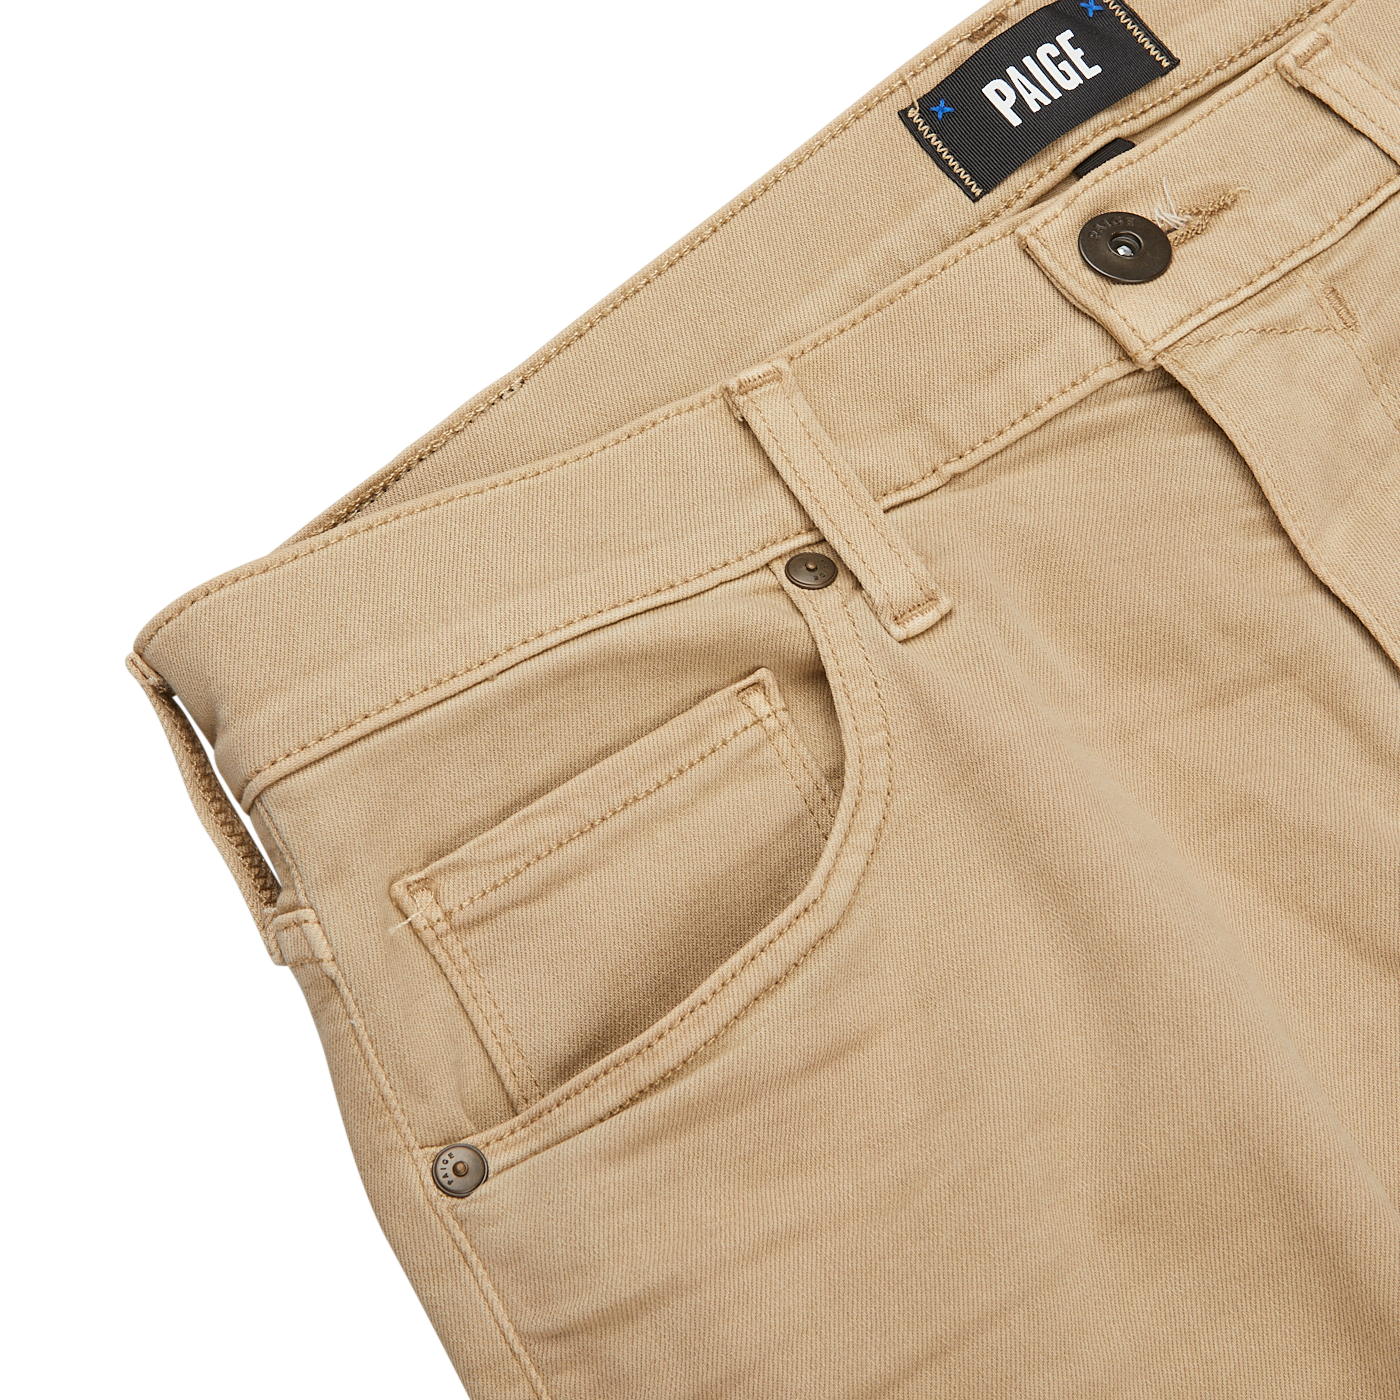 Close-up of beige pants with a visible label reading "PAIGE" above the waistband, showcasing belt loops, front pocket, and button closure on a light surface. These Caramel Beige Cotton Transcend Federal Slim Jeans are crafted from Transcend fabric for a comfortable fit.